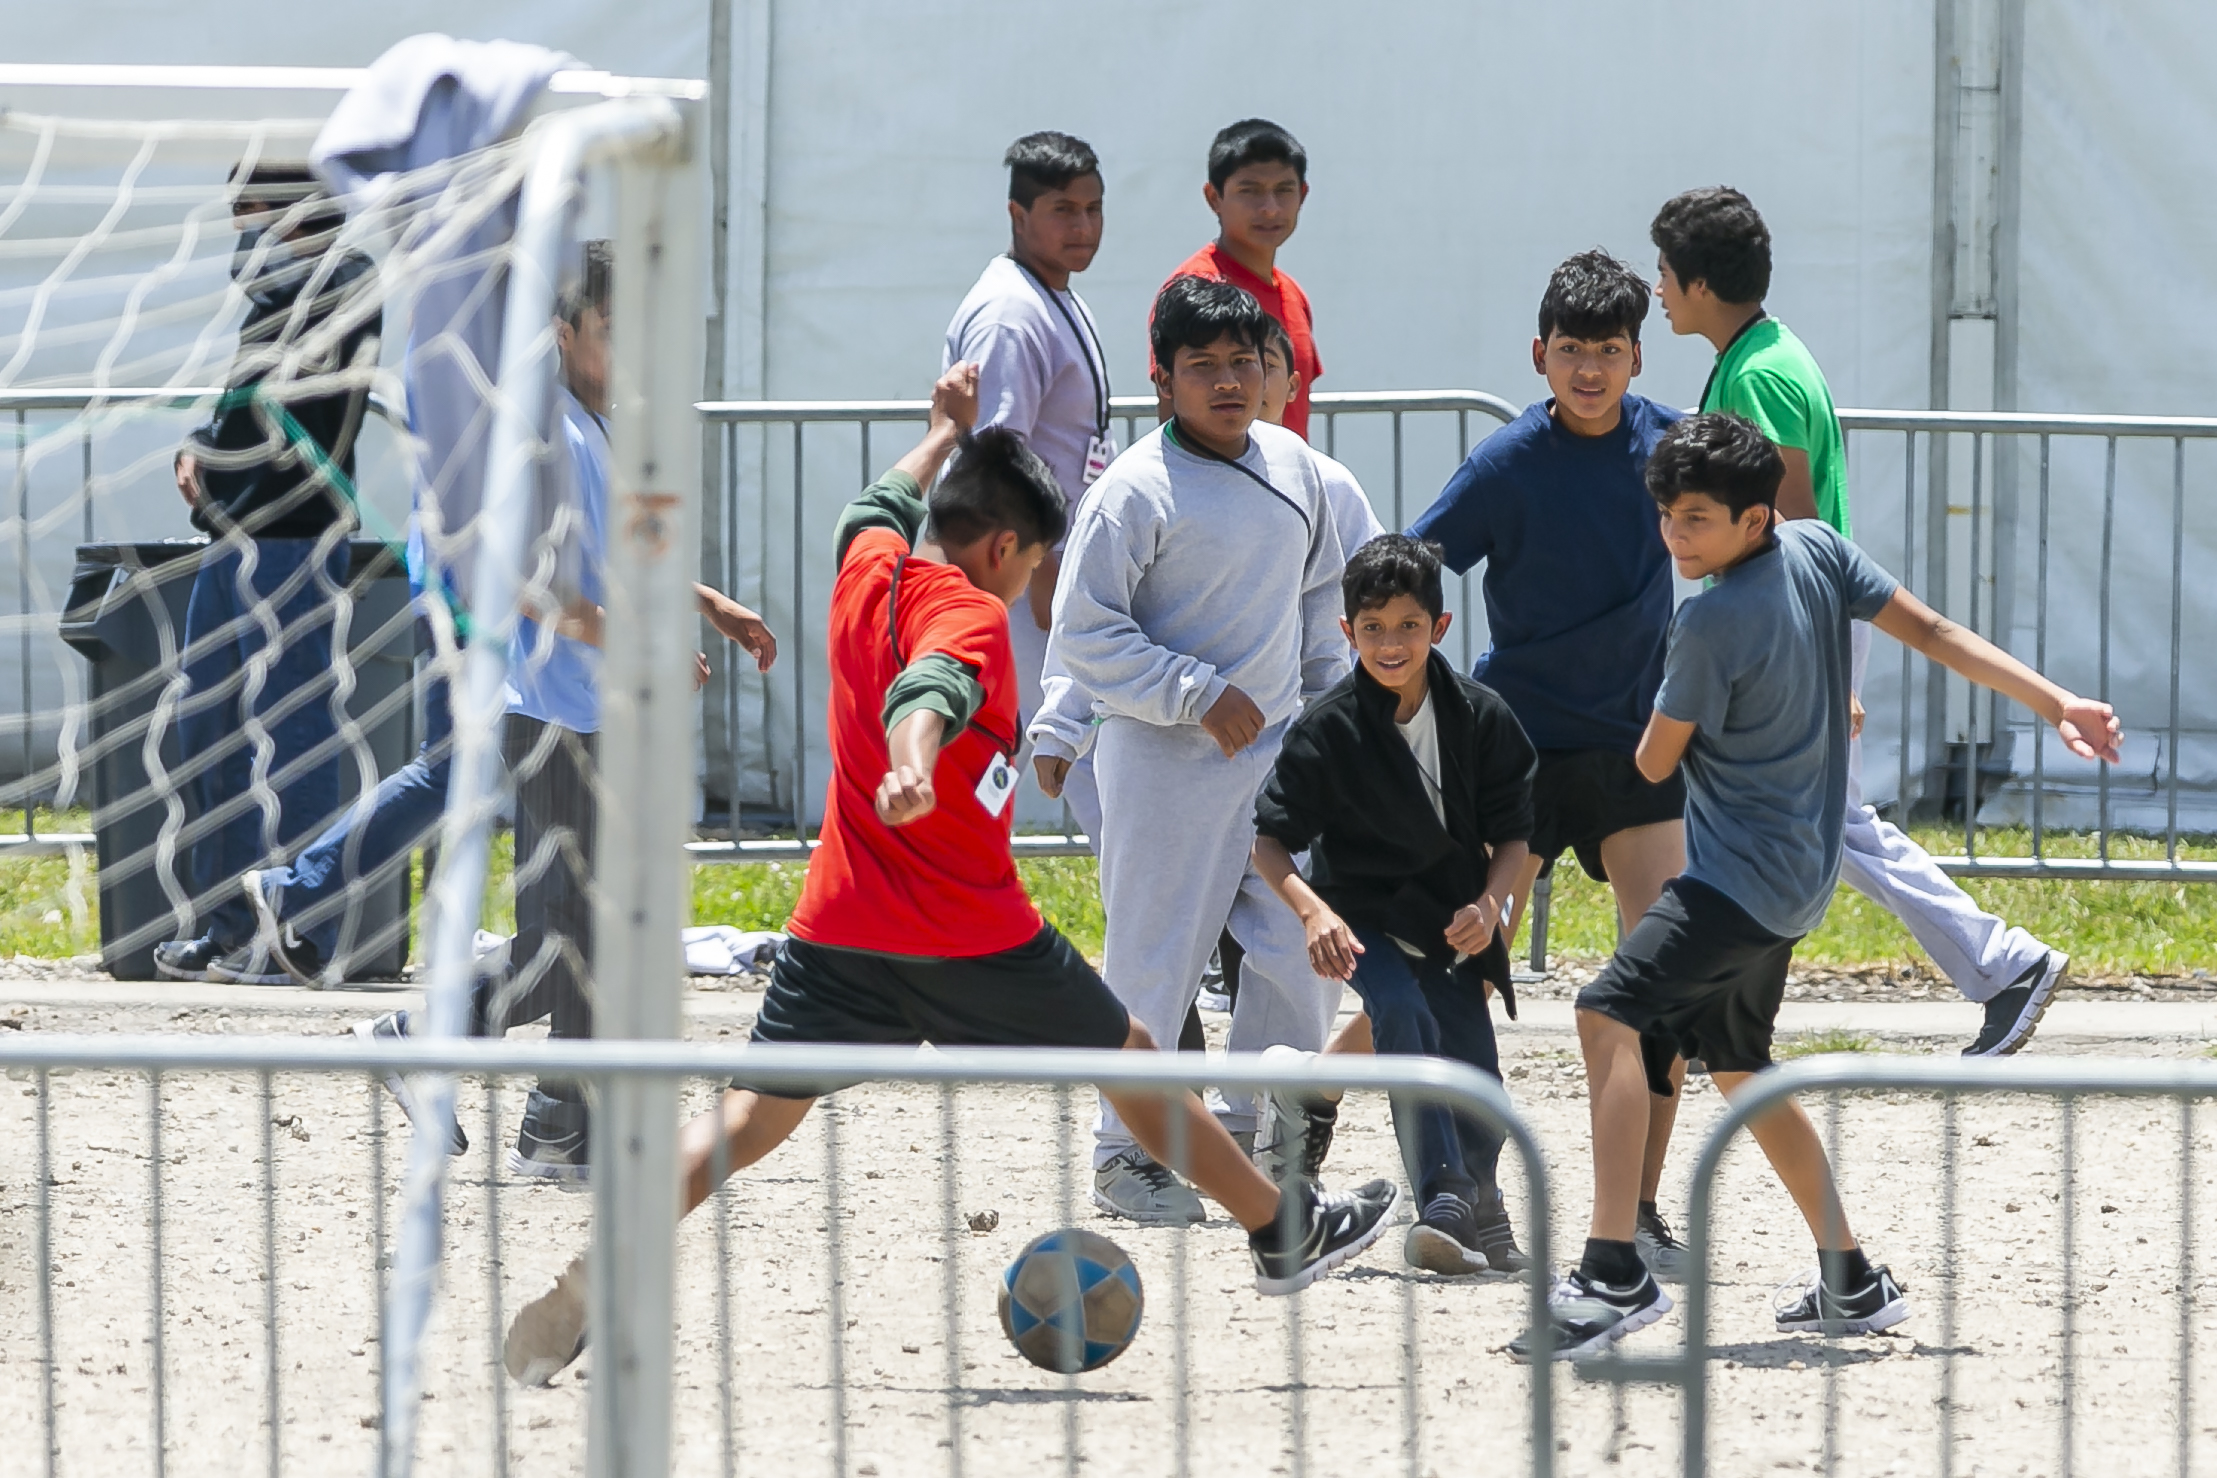  Migrant children play soccer inside the Homestead Temporary Shelter for Unaccompanied Children on Good Friday in Homestead, Florida on April 19, 2019. 